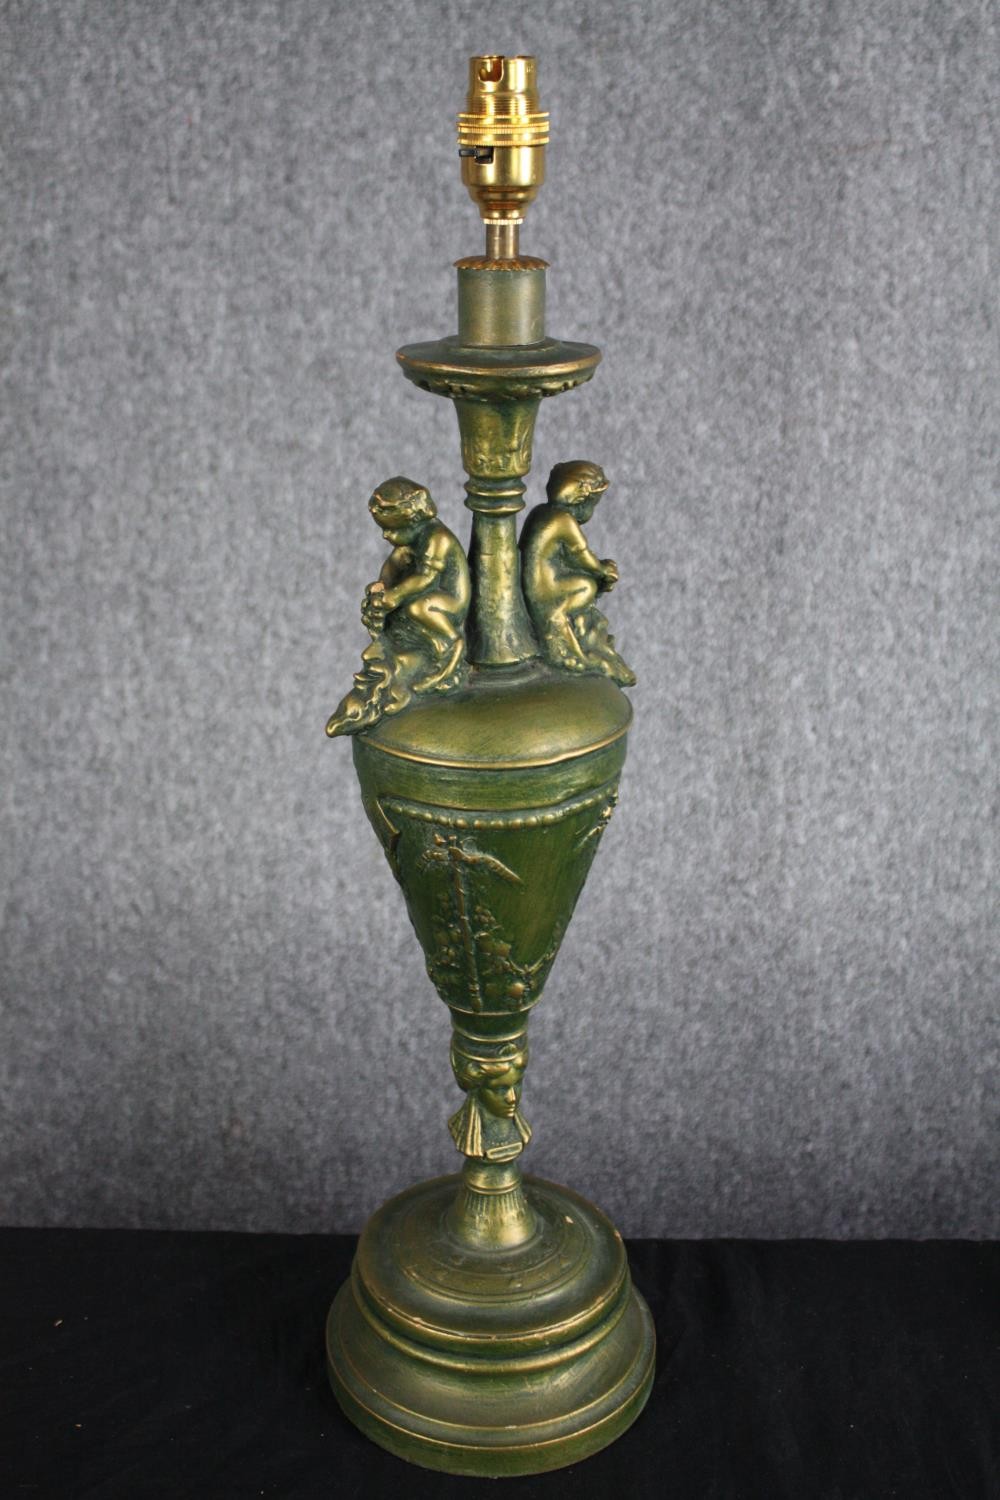 A pair of painted wooden urn design lamps. Decorated with cherubs and a worn greenish gold finish. - Image 2 of 4